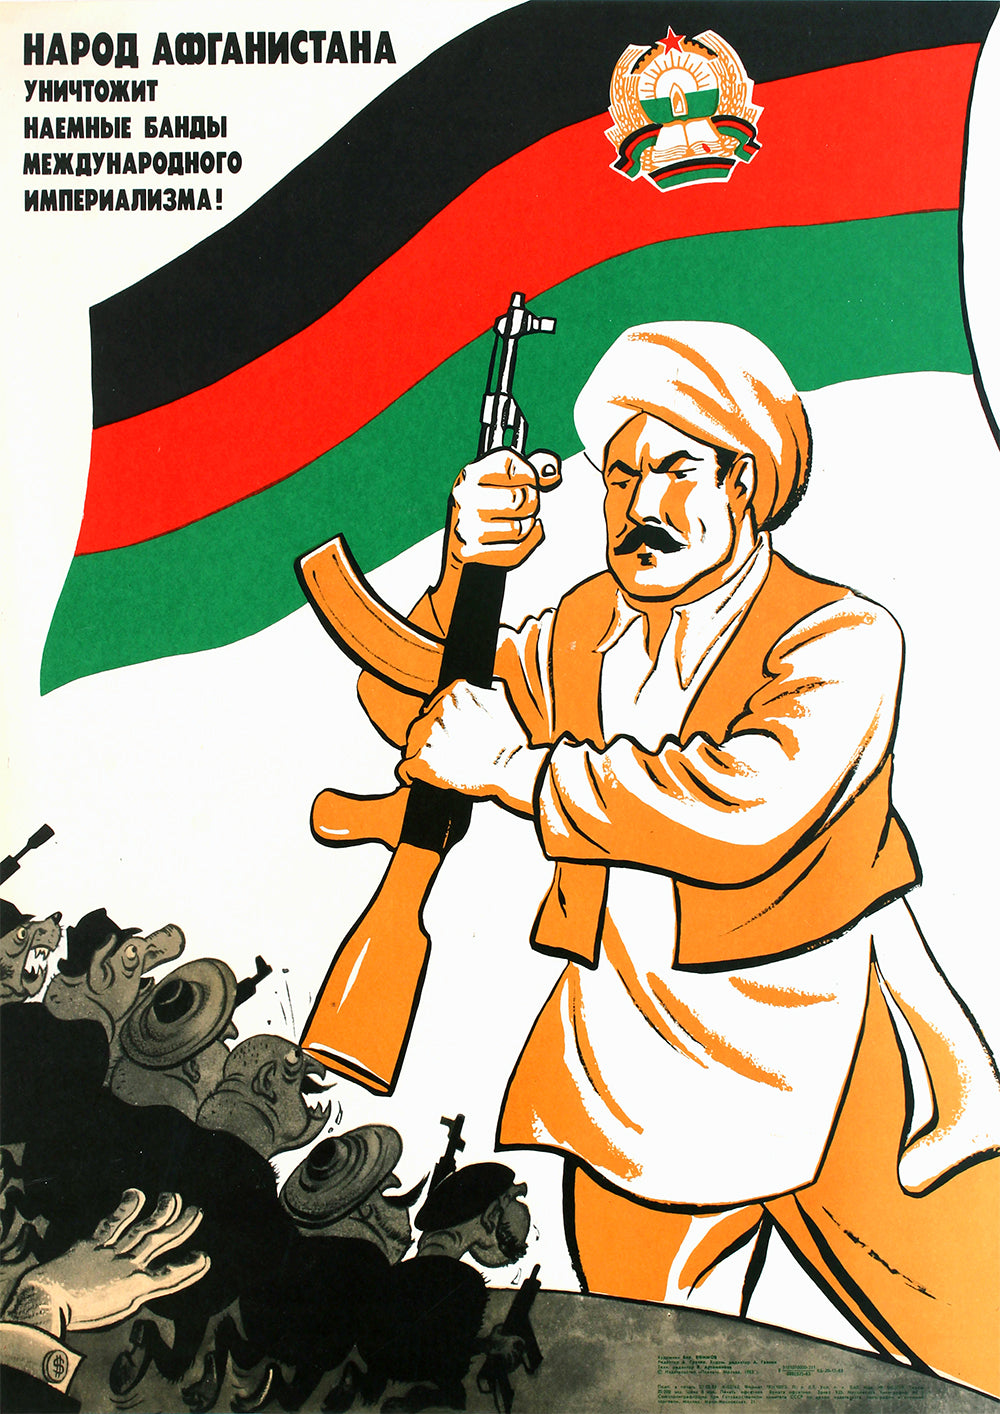 The people of Afghanistan will destroy the international imperialist gangs! - Soviet poster